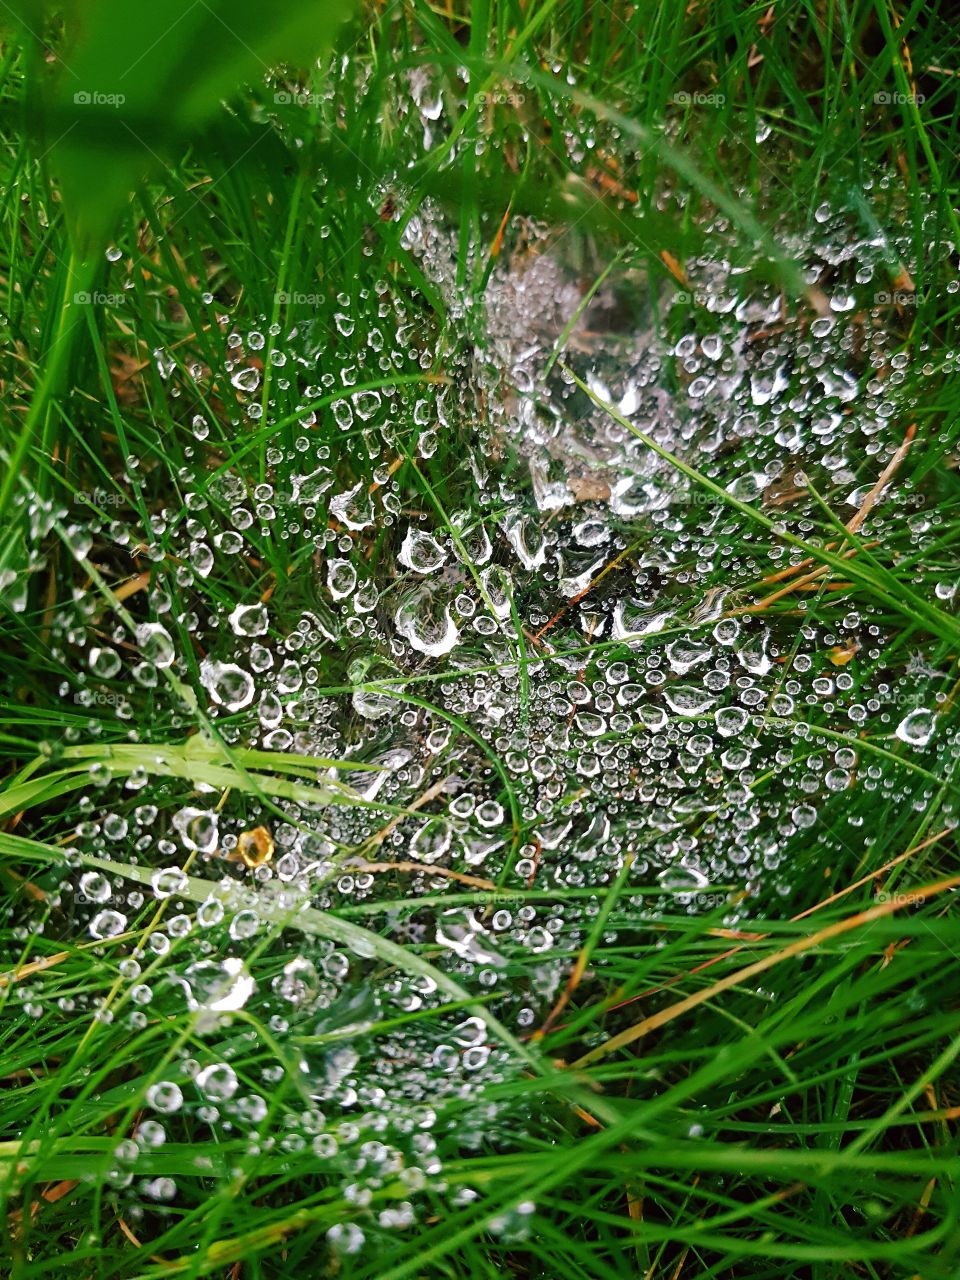 cobwebs in the grass